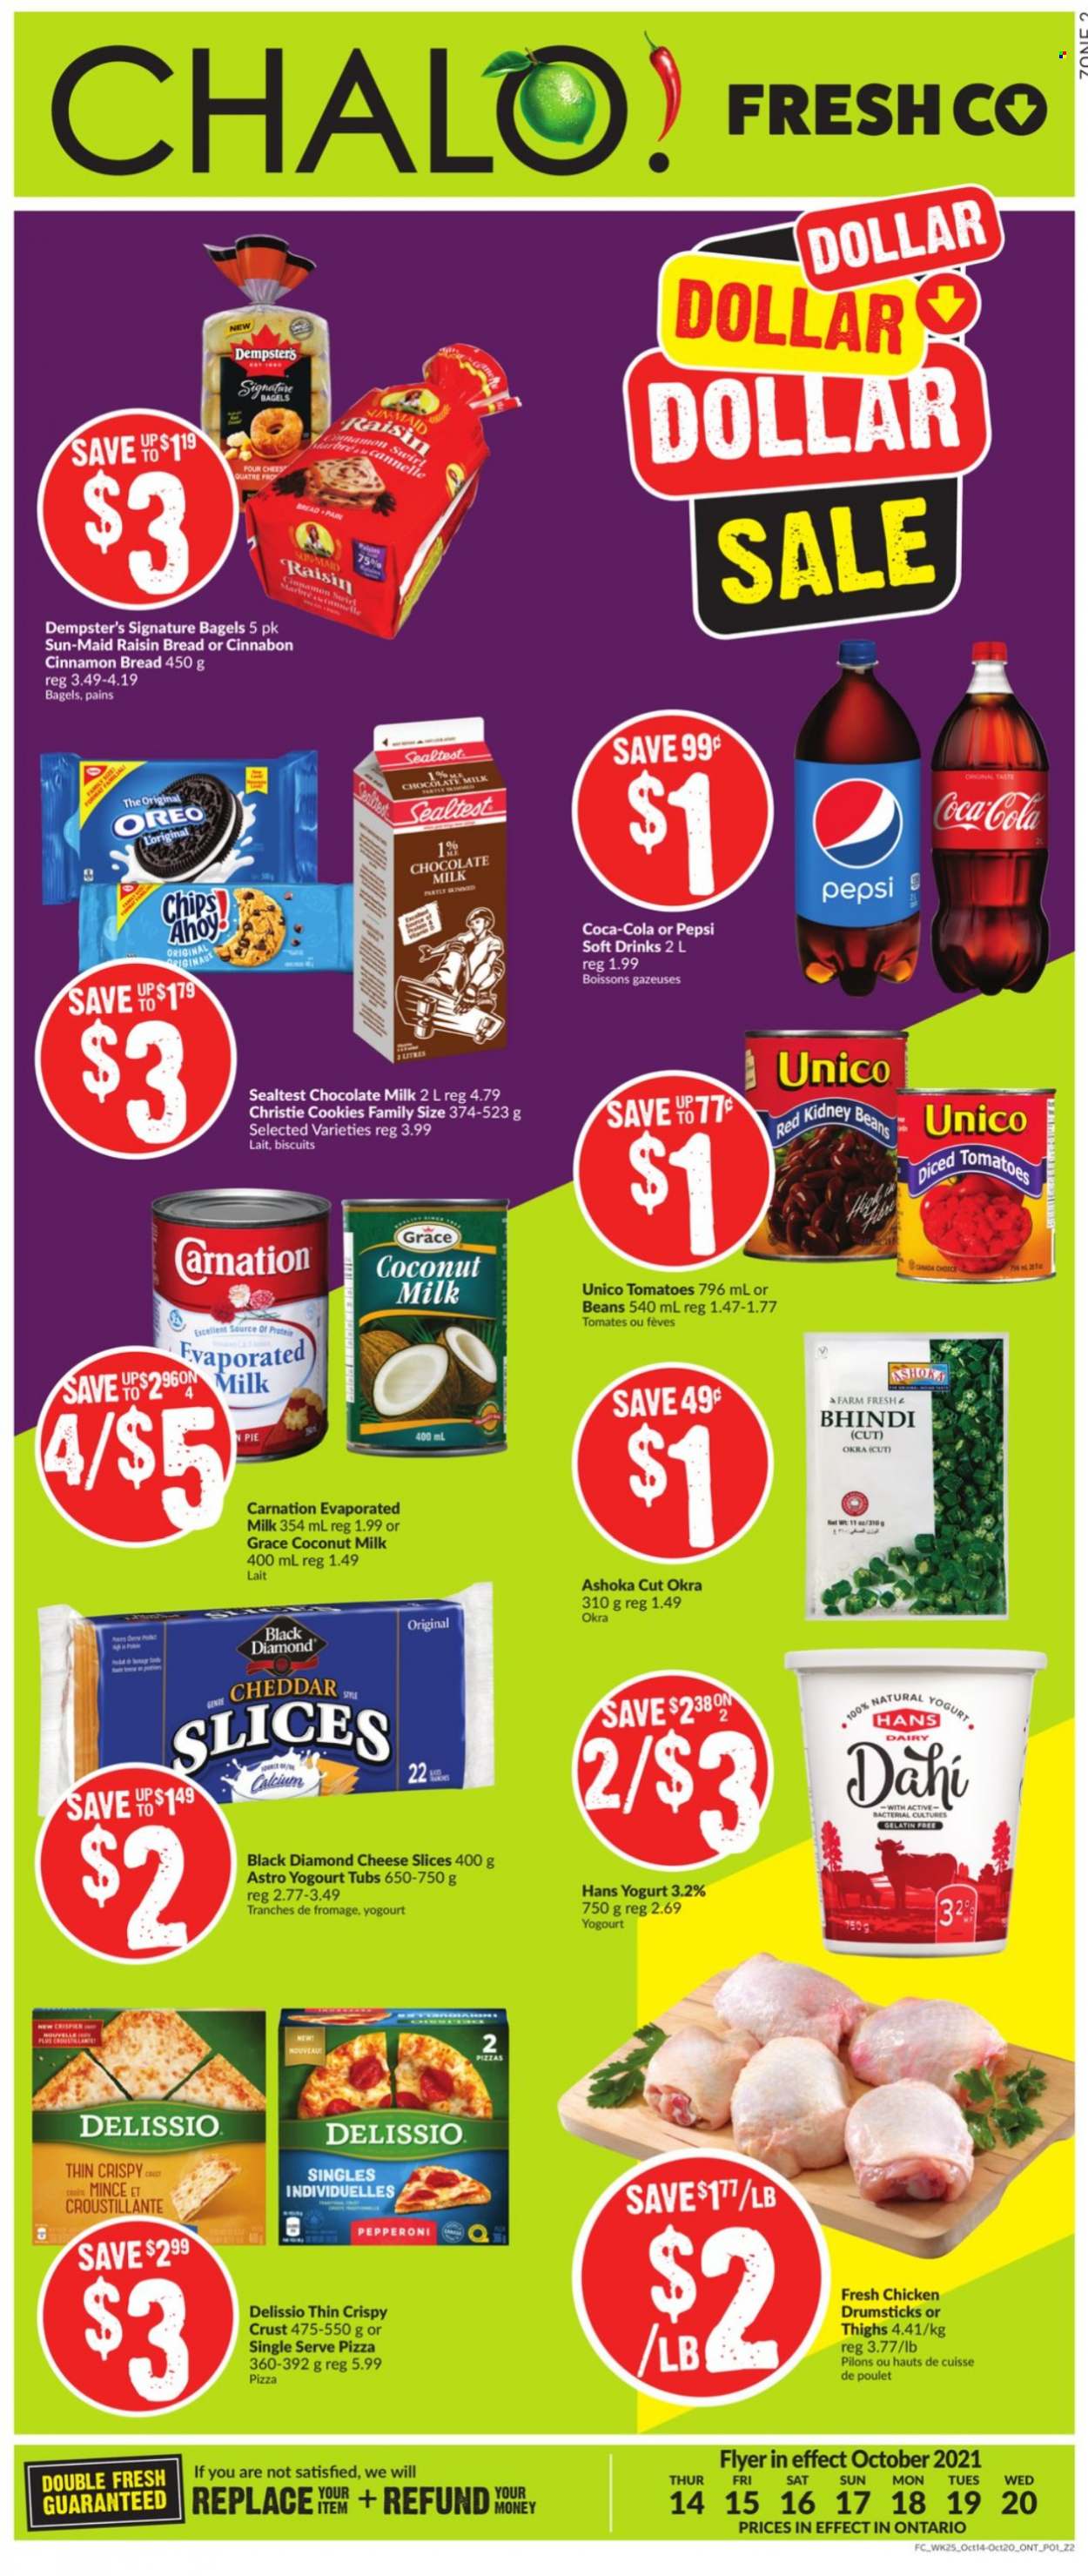 thumbnail - Chalo! FreshCo. Flyer - October 14, 2021 - October 20, 2021 - Sales products - bagels, bread, pie, beans, okra, pizza, pepperoni, sliced cheese, yoghurt, evaporated milk, cookies, milk chocolate, chocolate, biscuit, coconut milk, cinnamon, Coca-Cola, Pepsi, soft drink, chicken drumsticks, chicken, gelatin, Oreo, calcium, chips. Page 1.